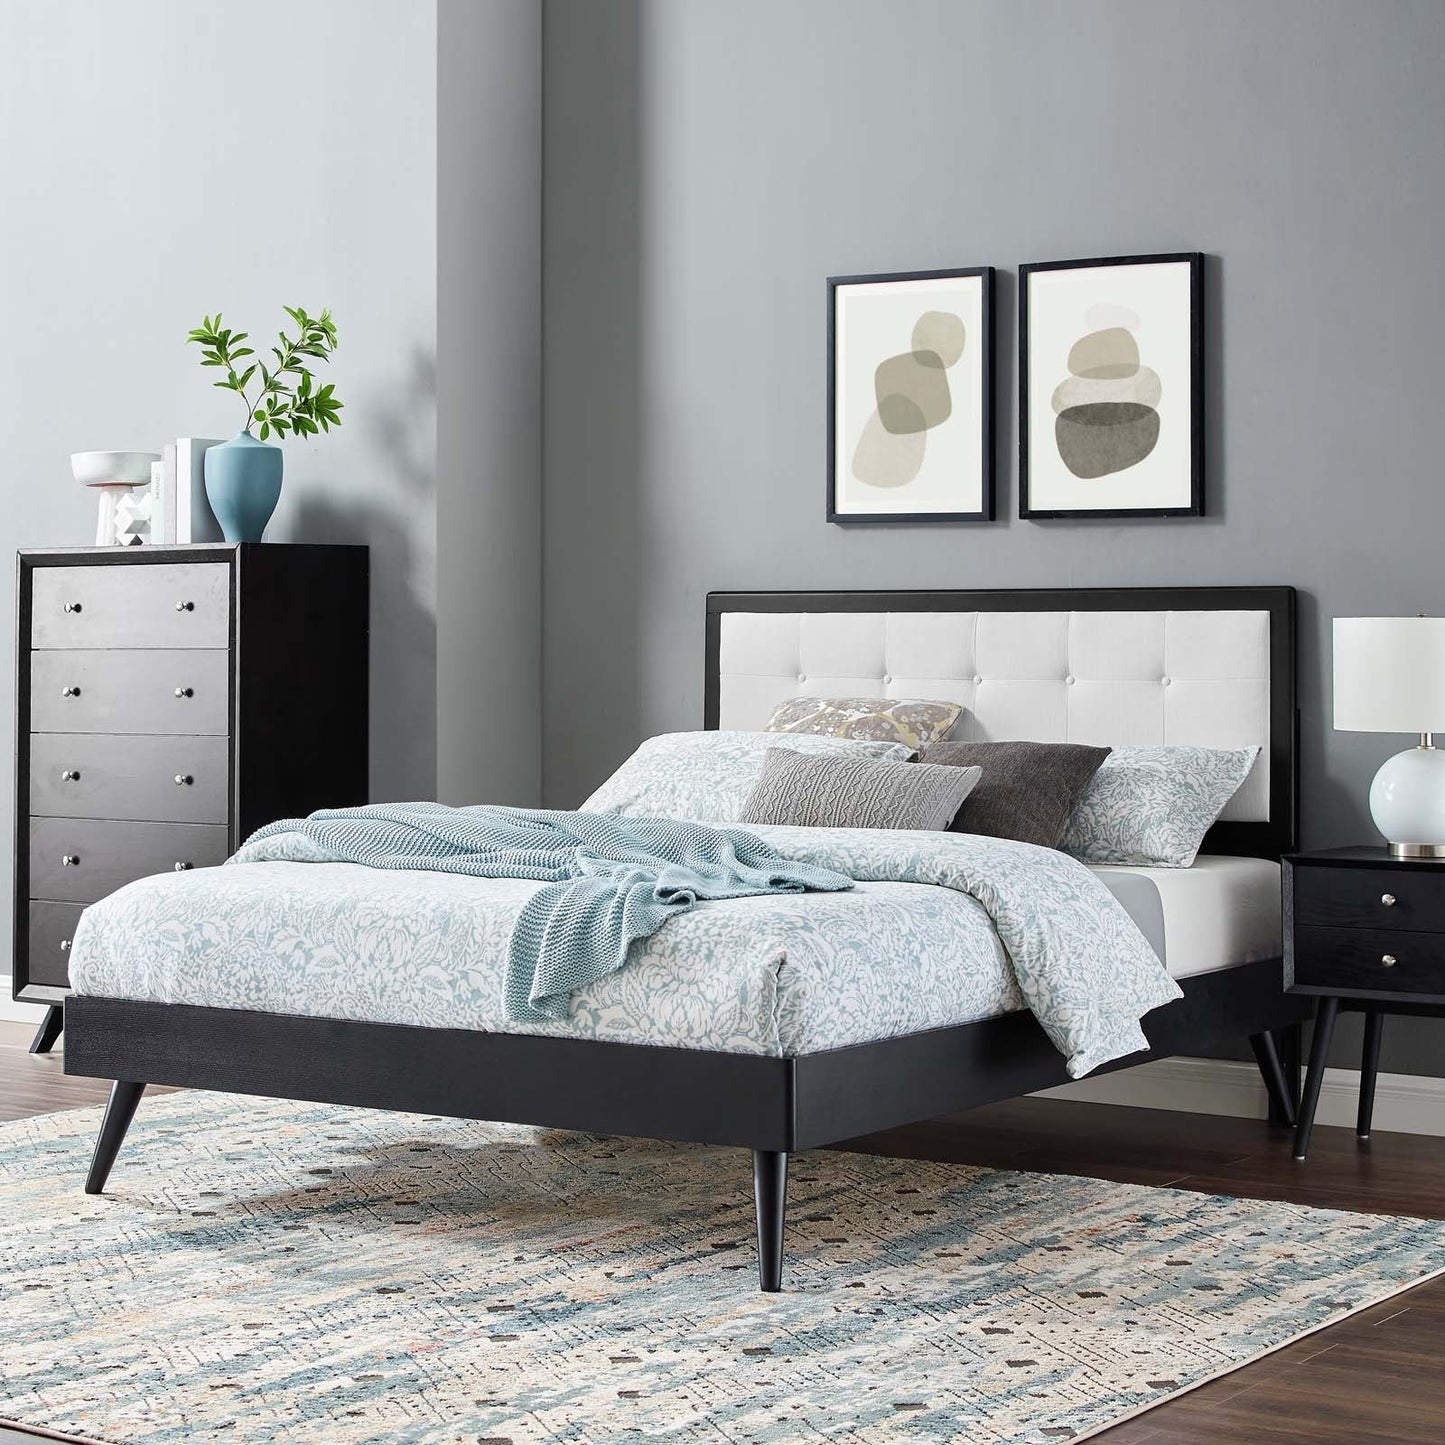 Agathe Wood Full Platform Bed With Splayed Legs